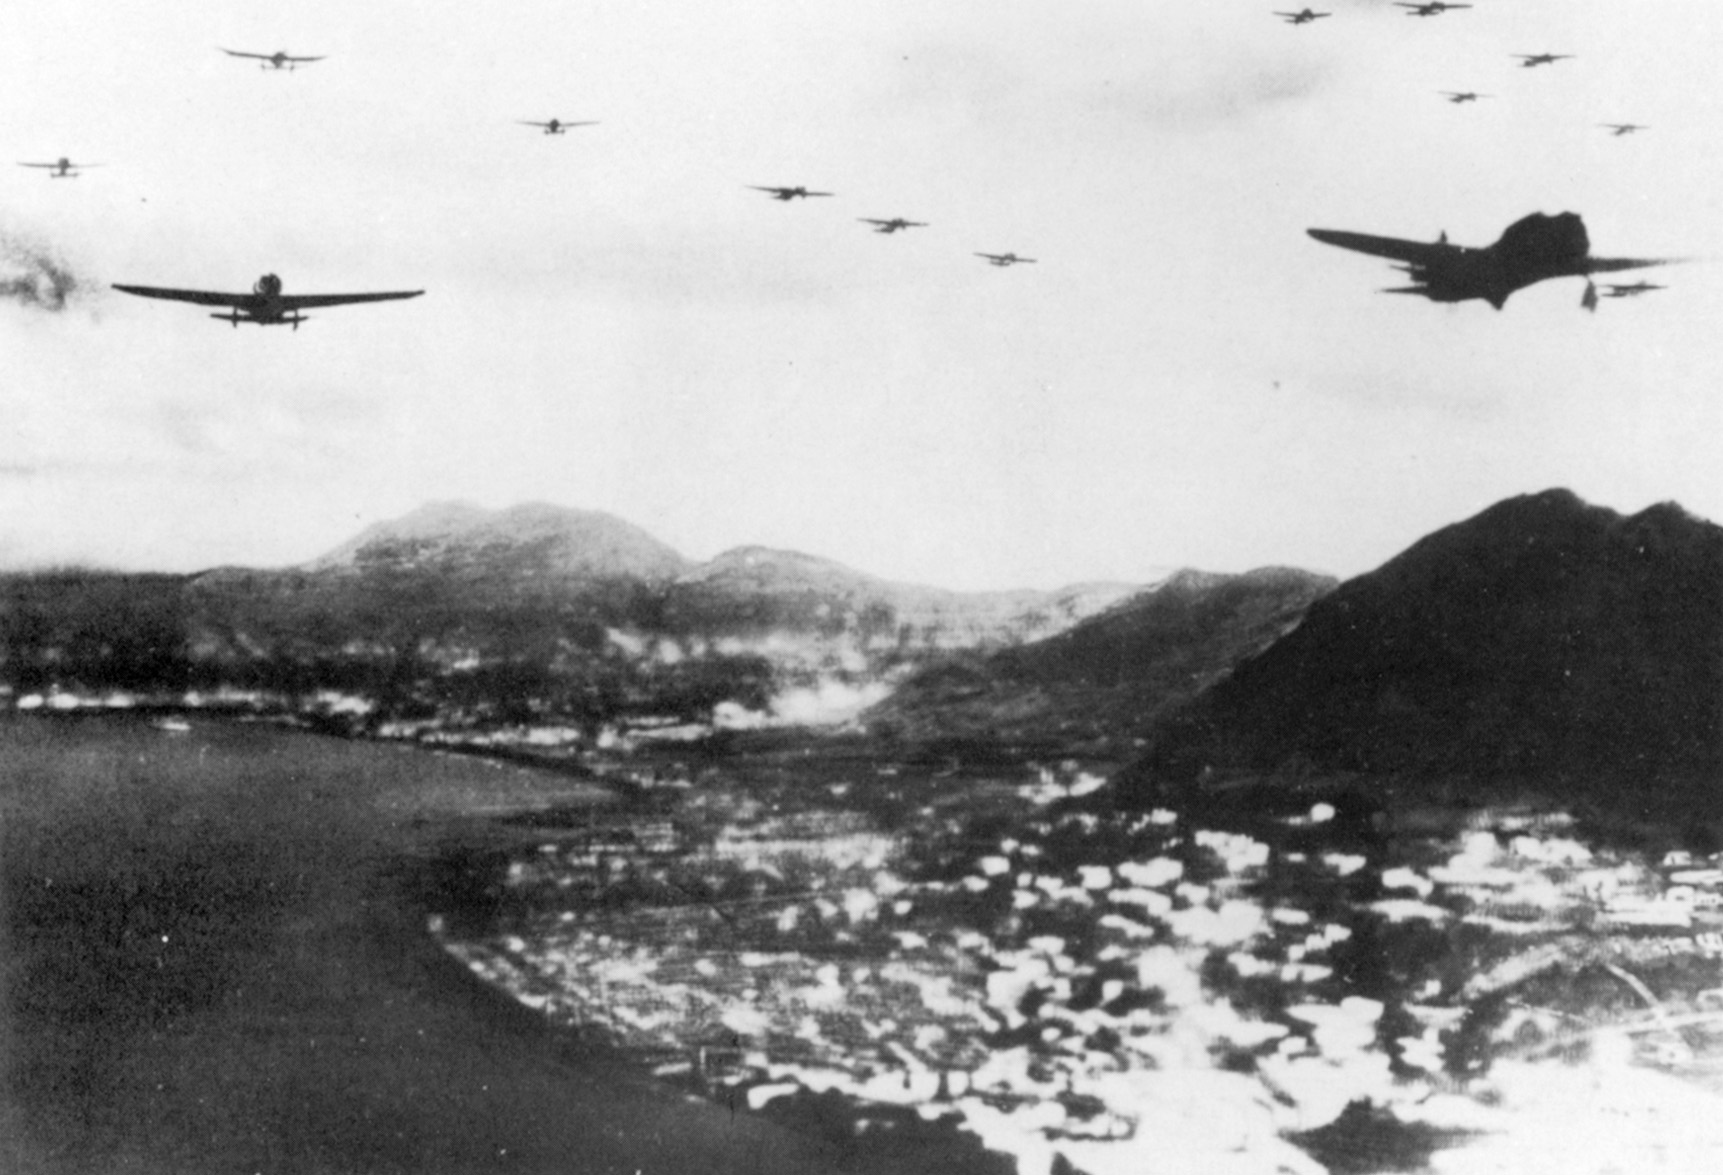 A formation of Japanese planes flies over Causeway Bay and heavily populated areas along Hong Kong’s northern shore. Mount Parker can be seen in the background.